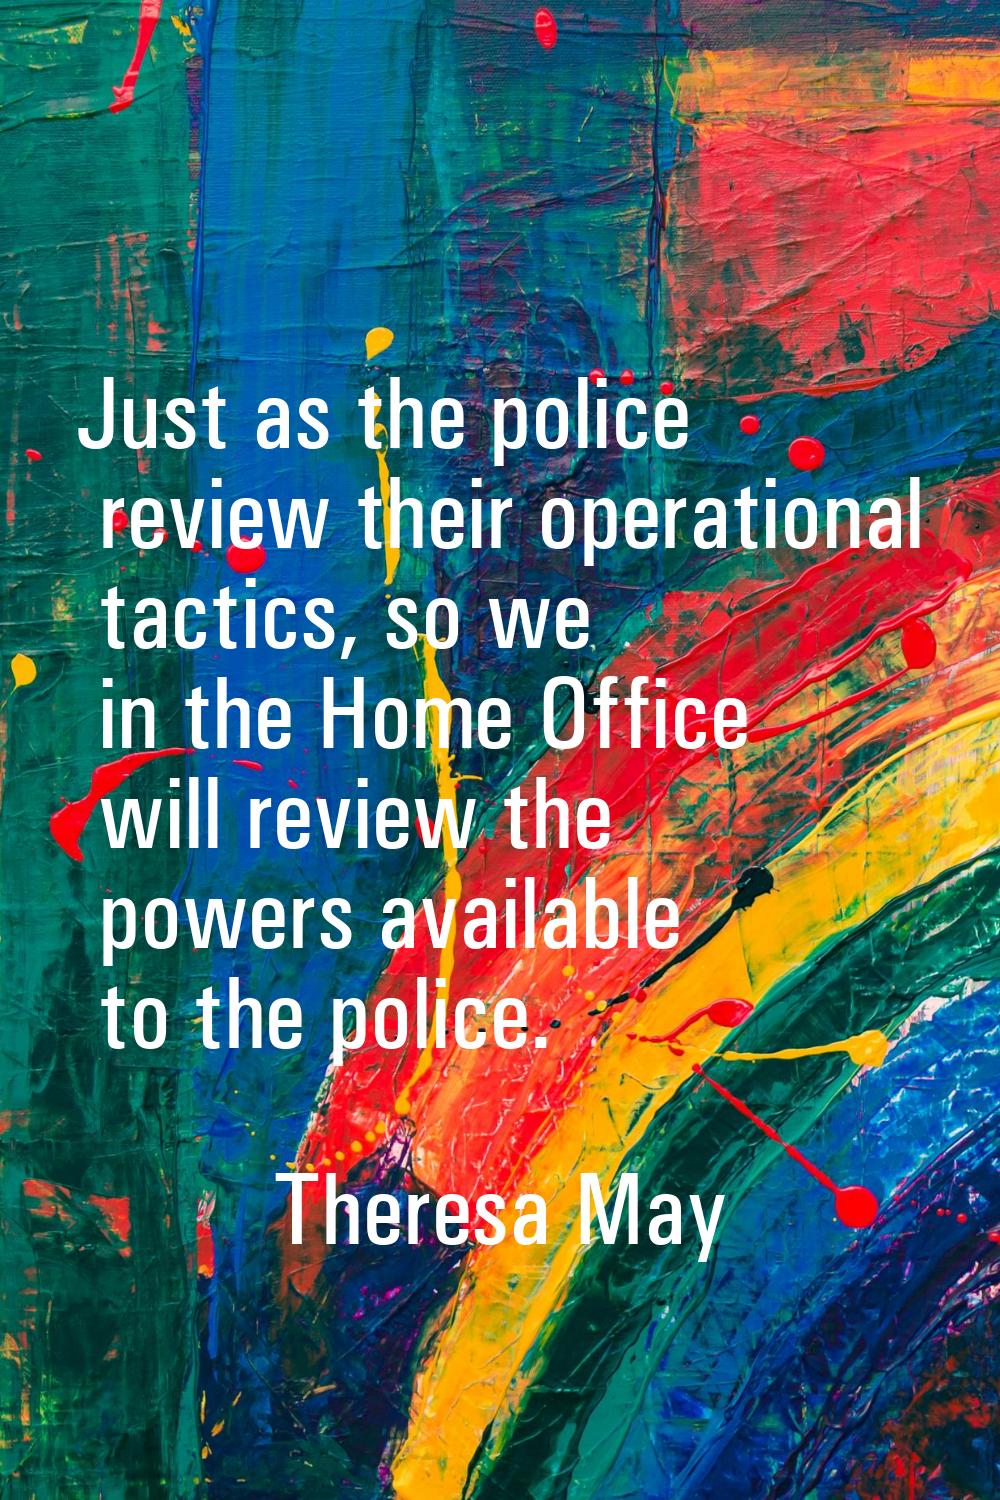 Just as the police review their operational tactics, so we in the Home Office will review the power